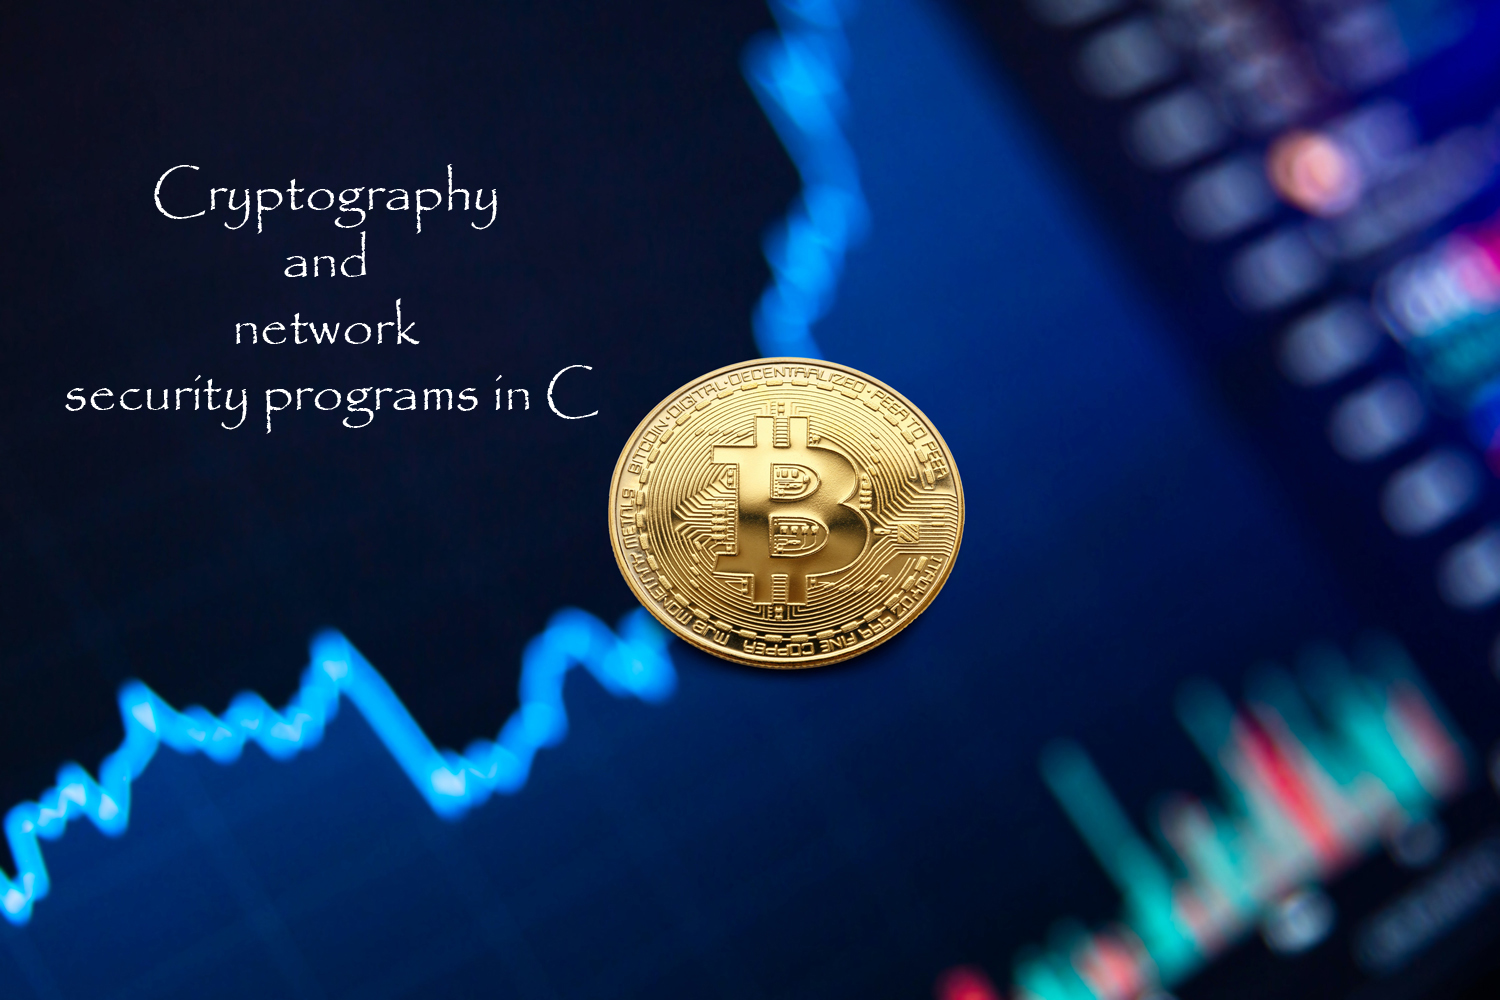 Cryptography and network security programs in C